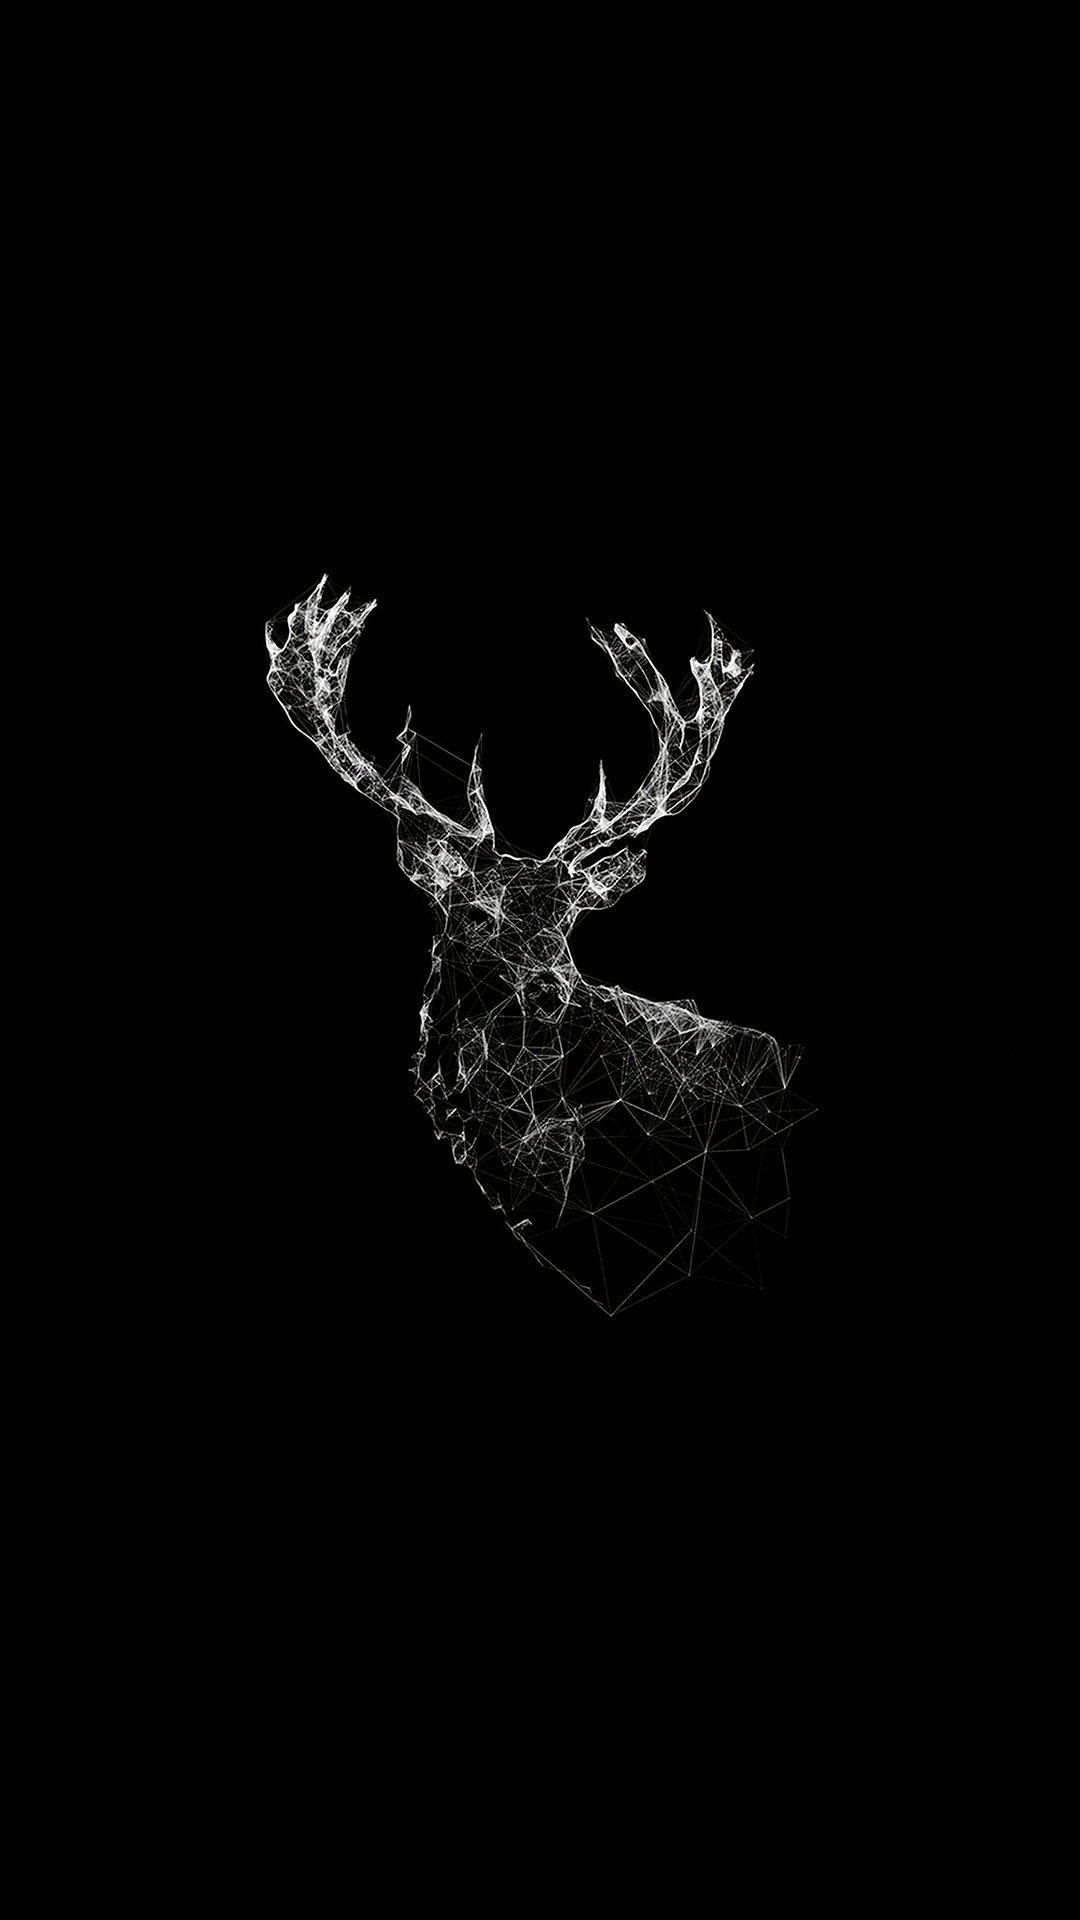 1080x1920 Low Poly Deer Illustration Android Wallpaper